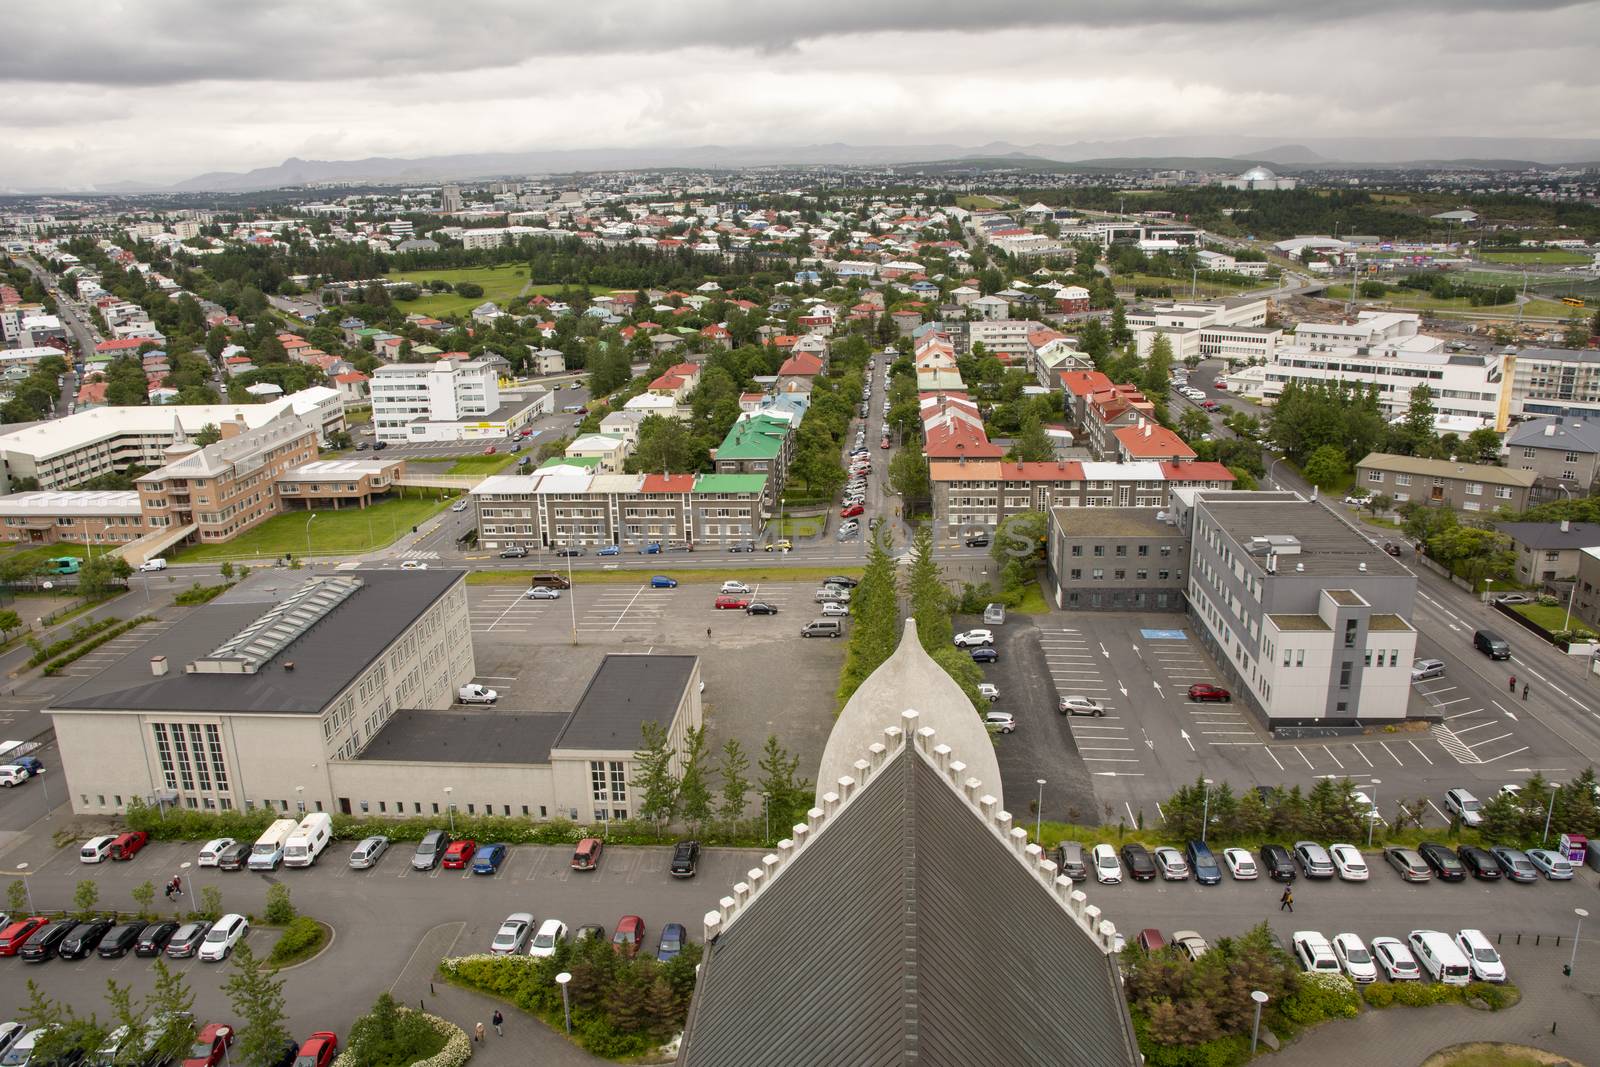 Reykjavik,Iceland, July 2019: skyline and cityscape with view over houses